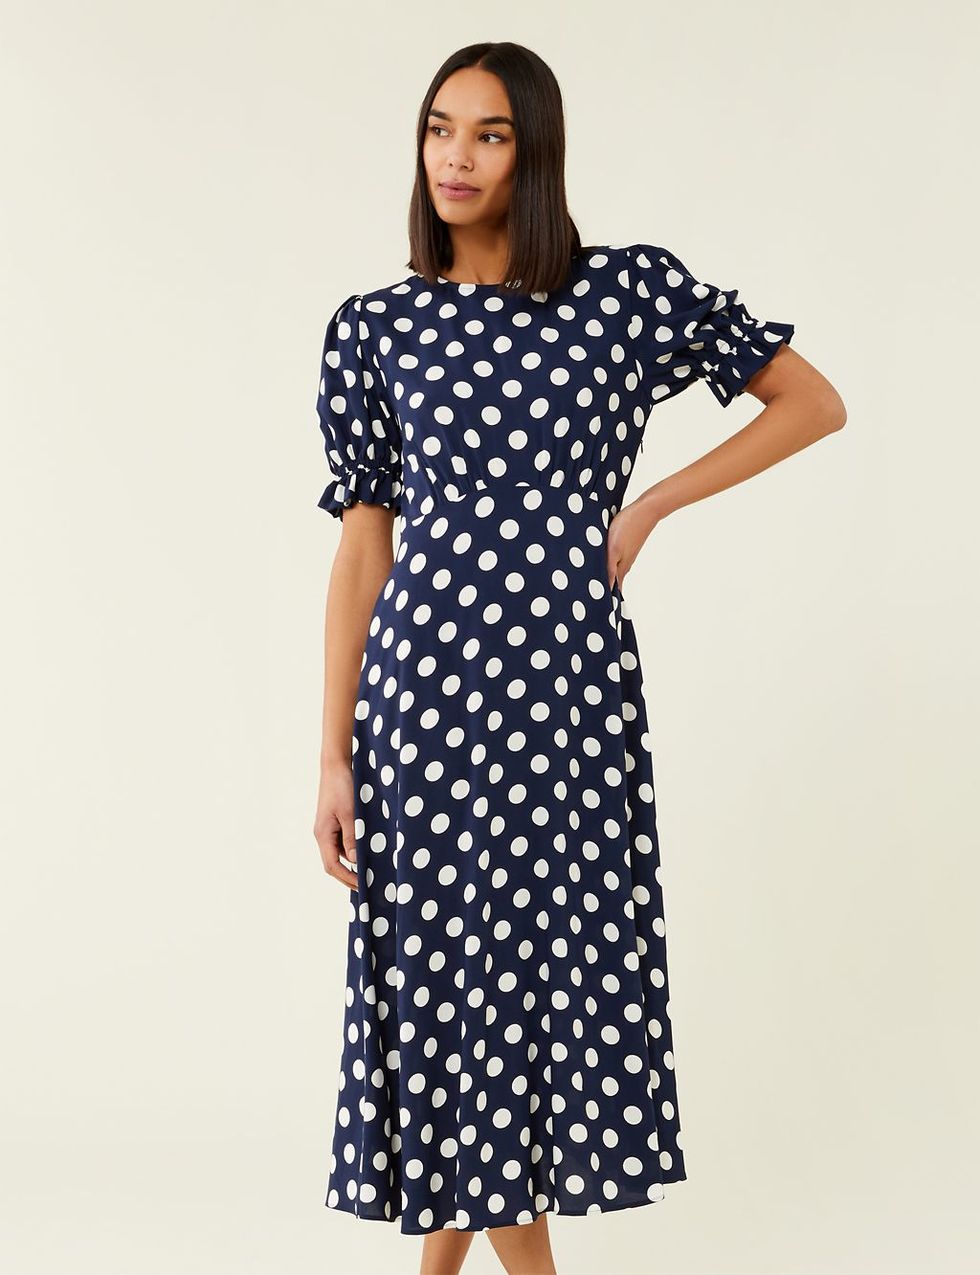 10 of the prettiest polka dot dresses for spring and summer